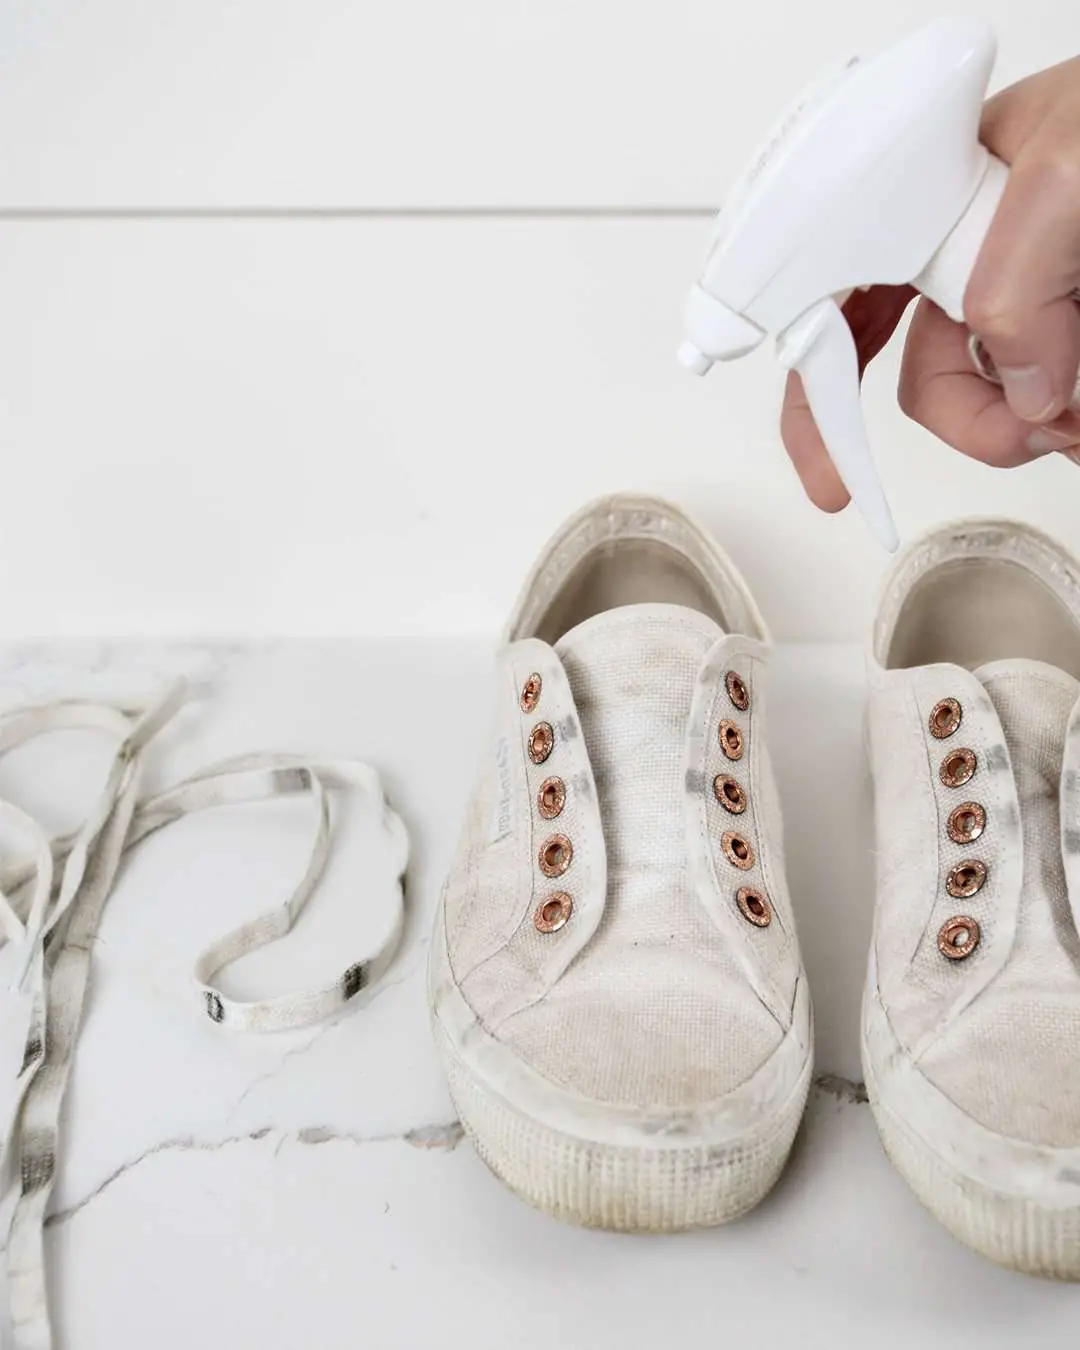 How to Clean White Canvas Sneakers